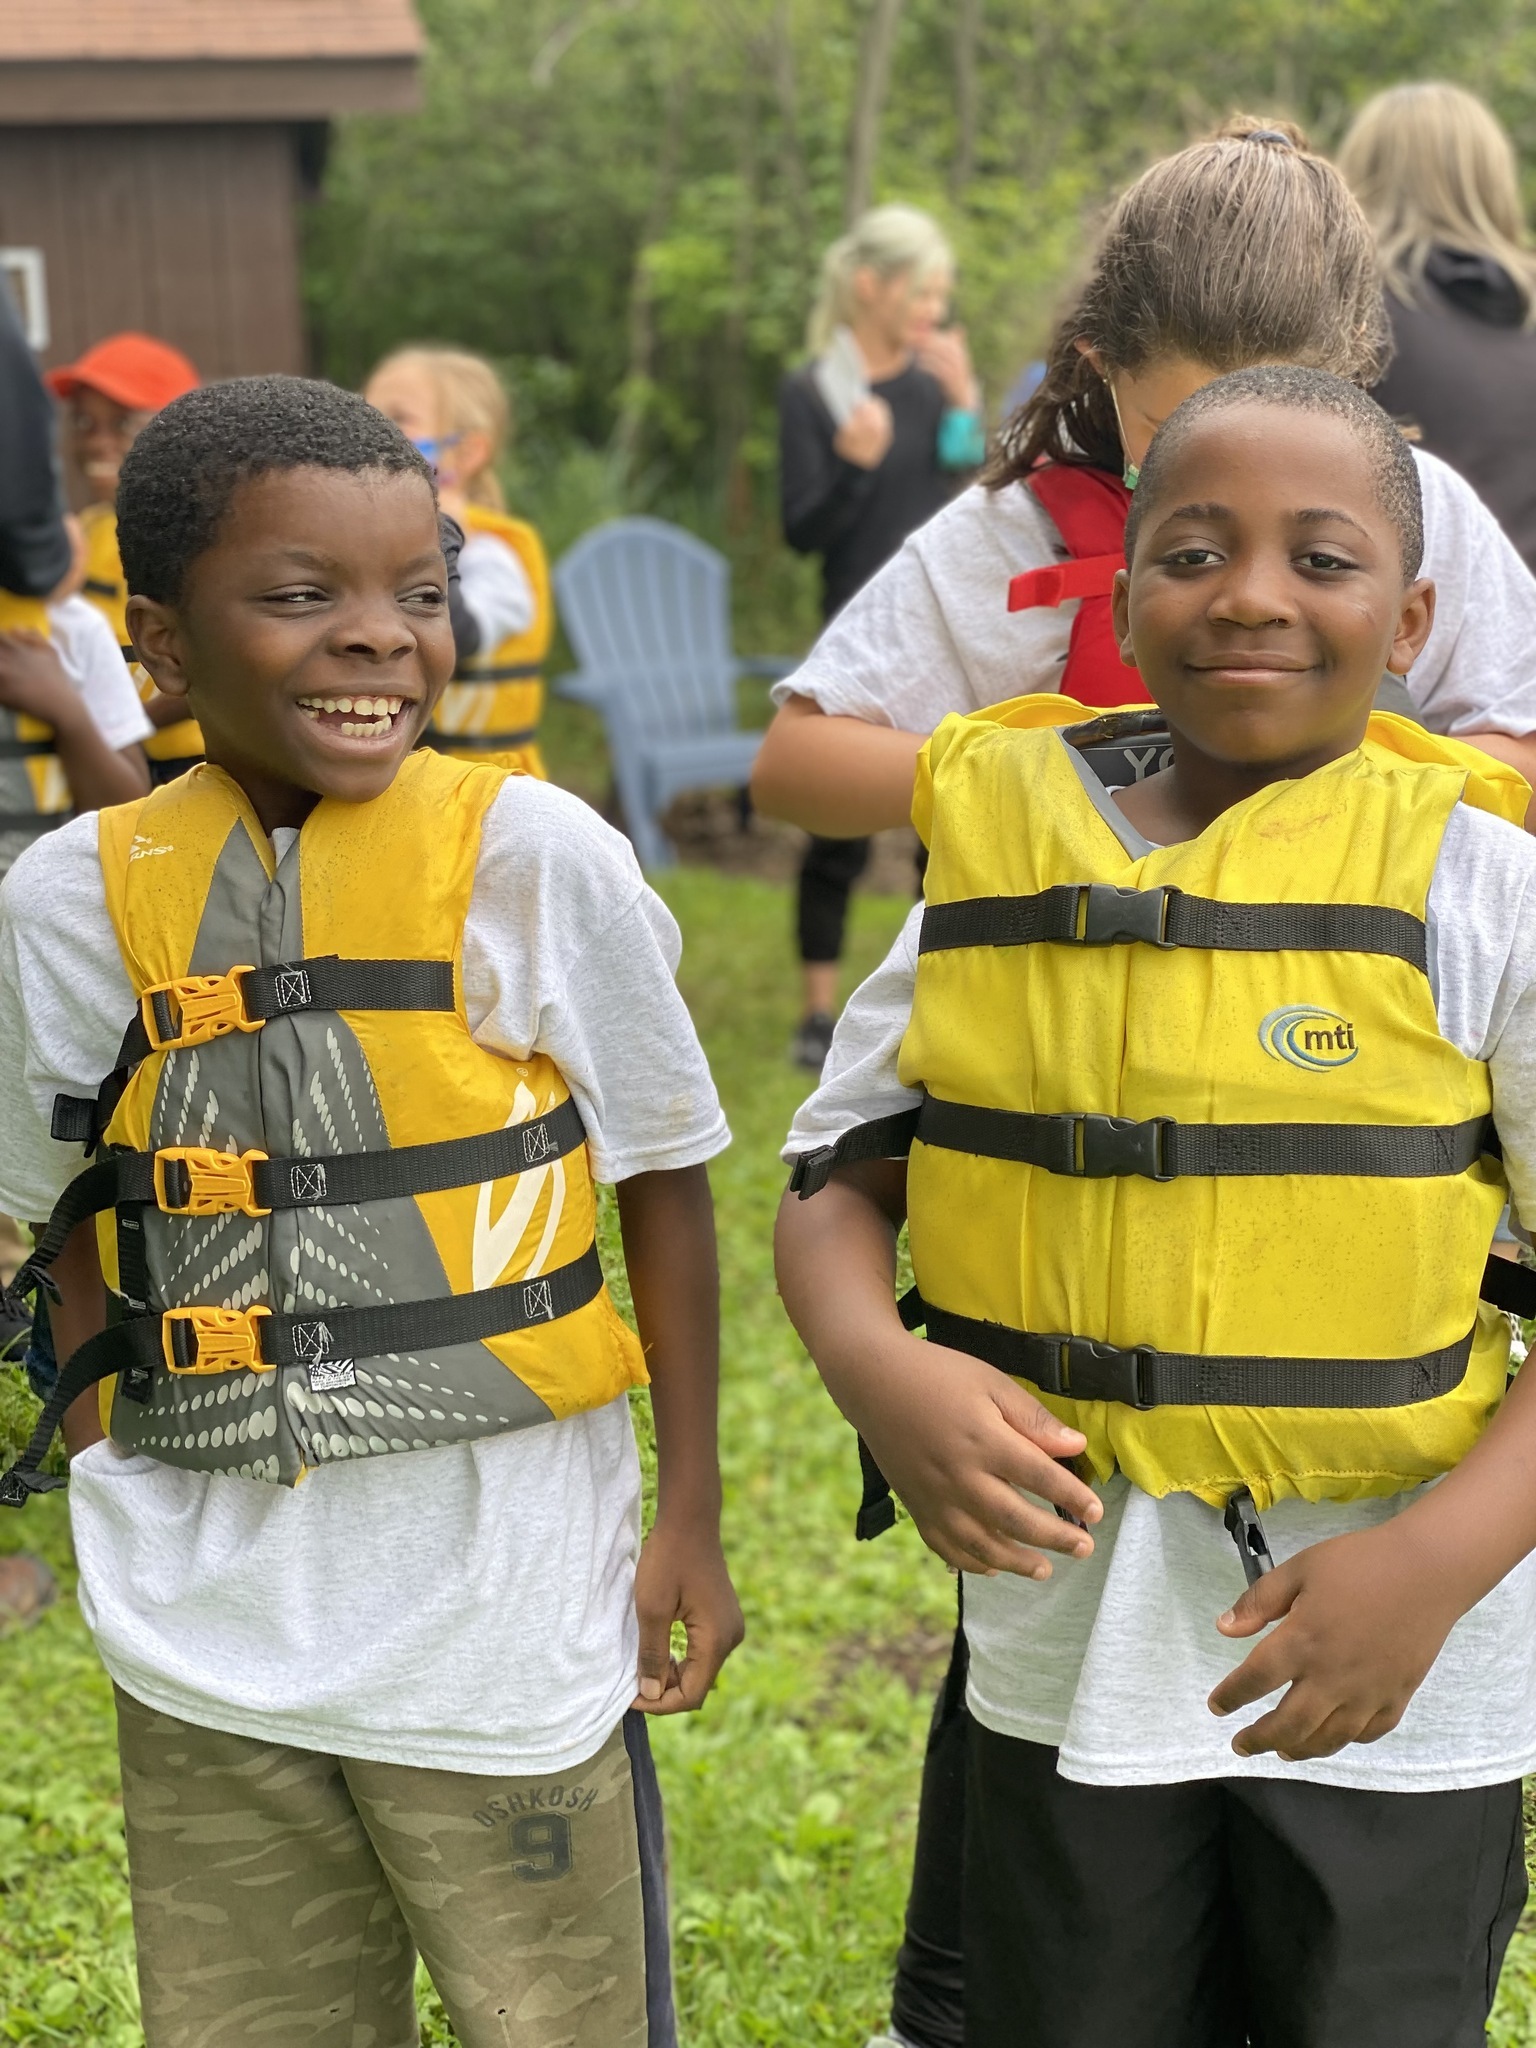 Two students smile while wearing yellow life jackets